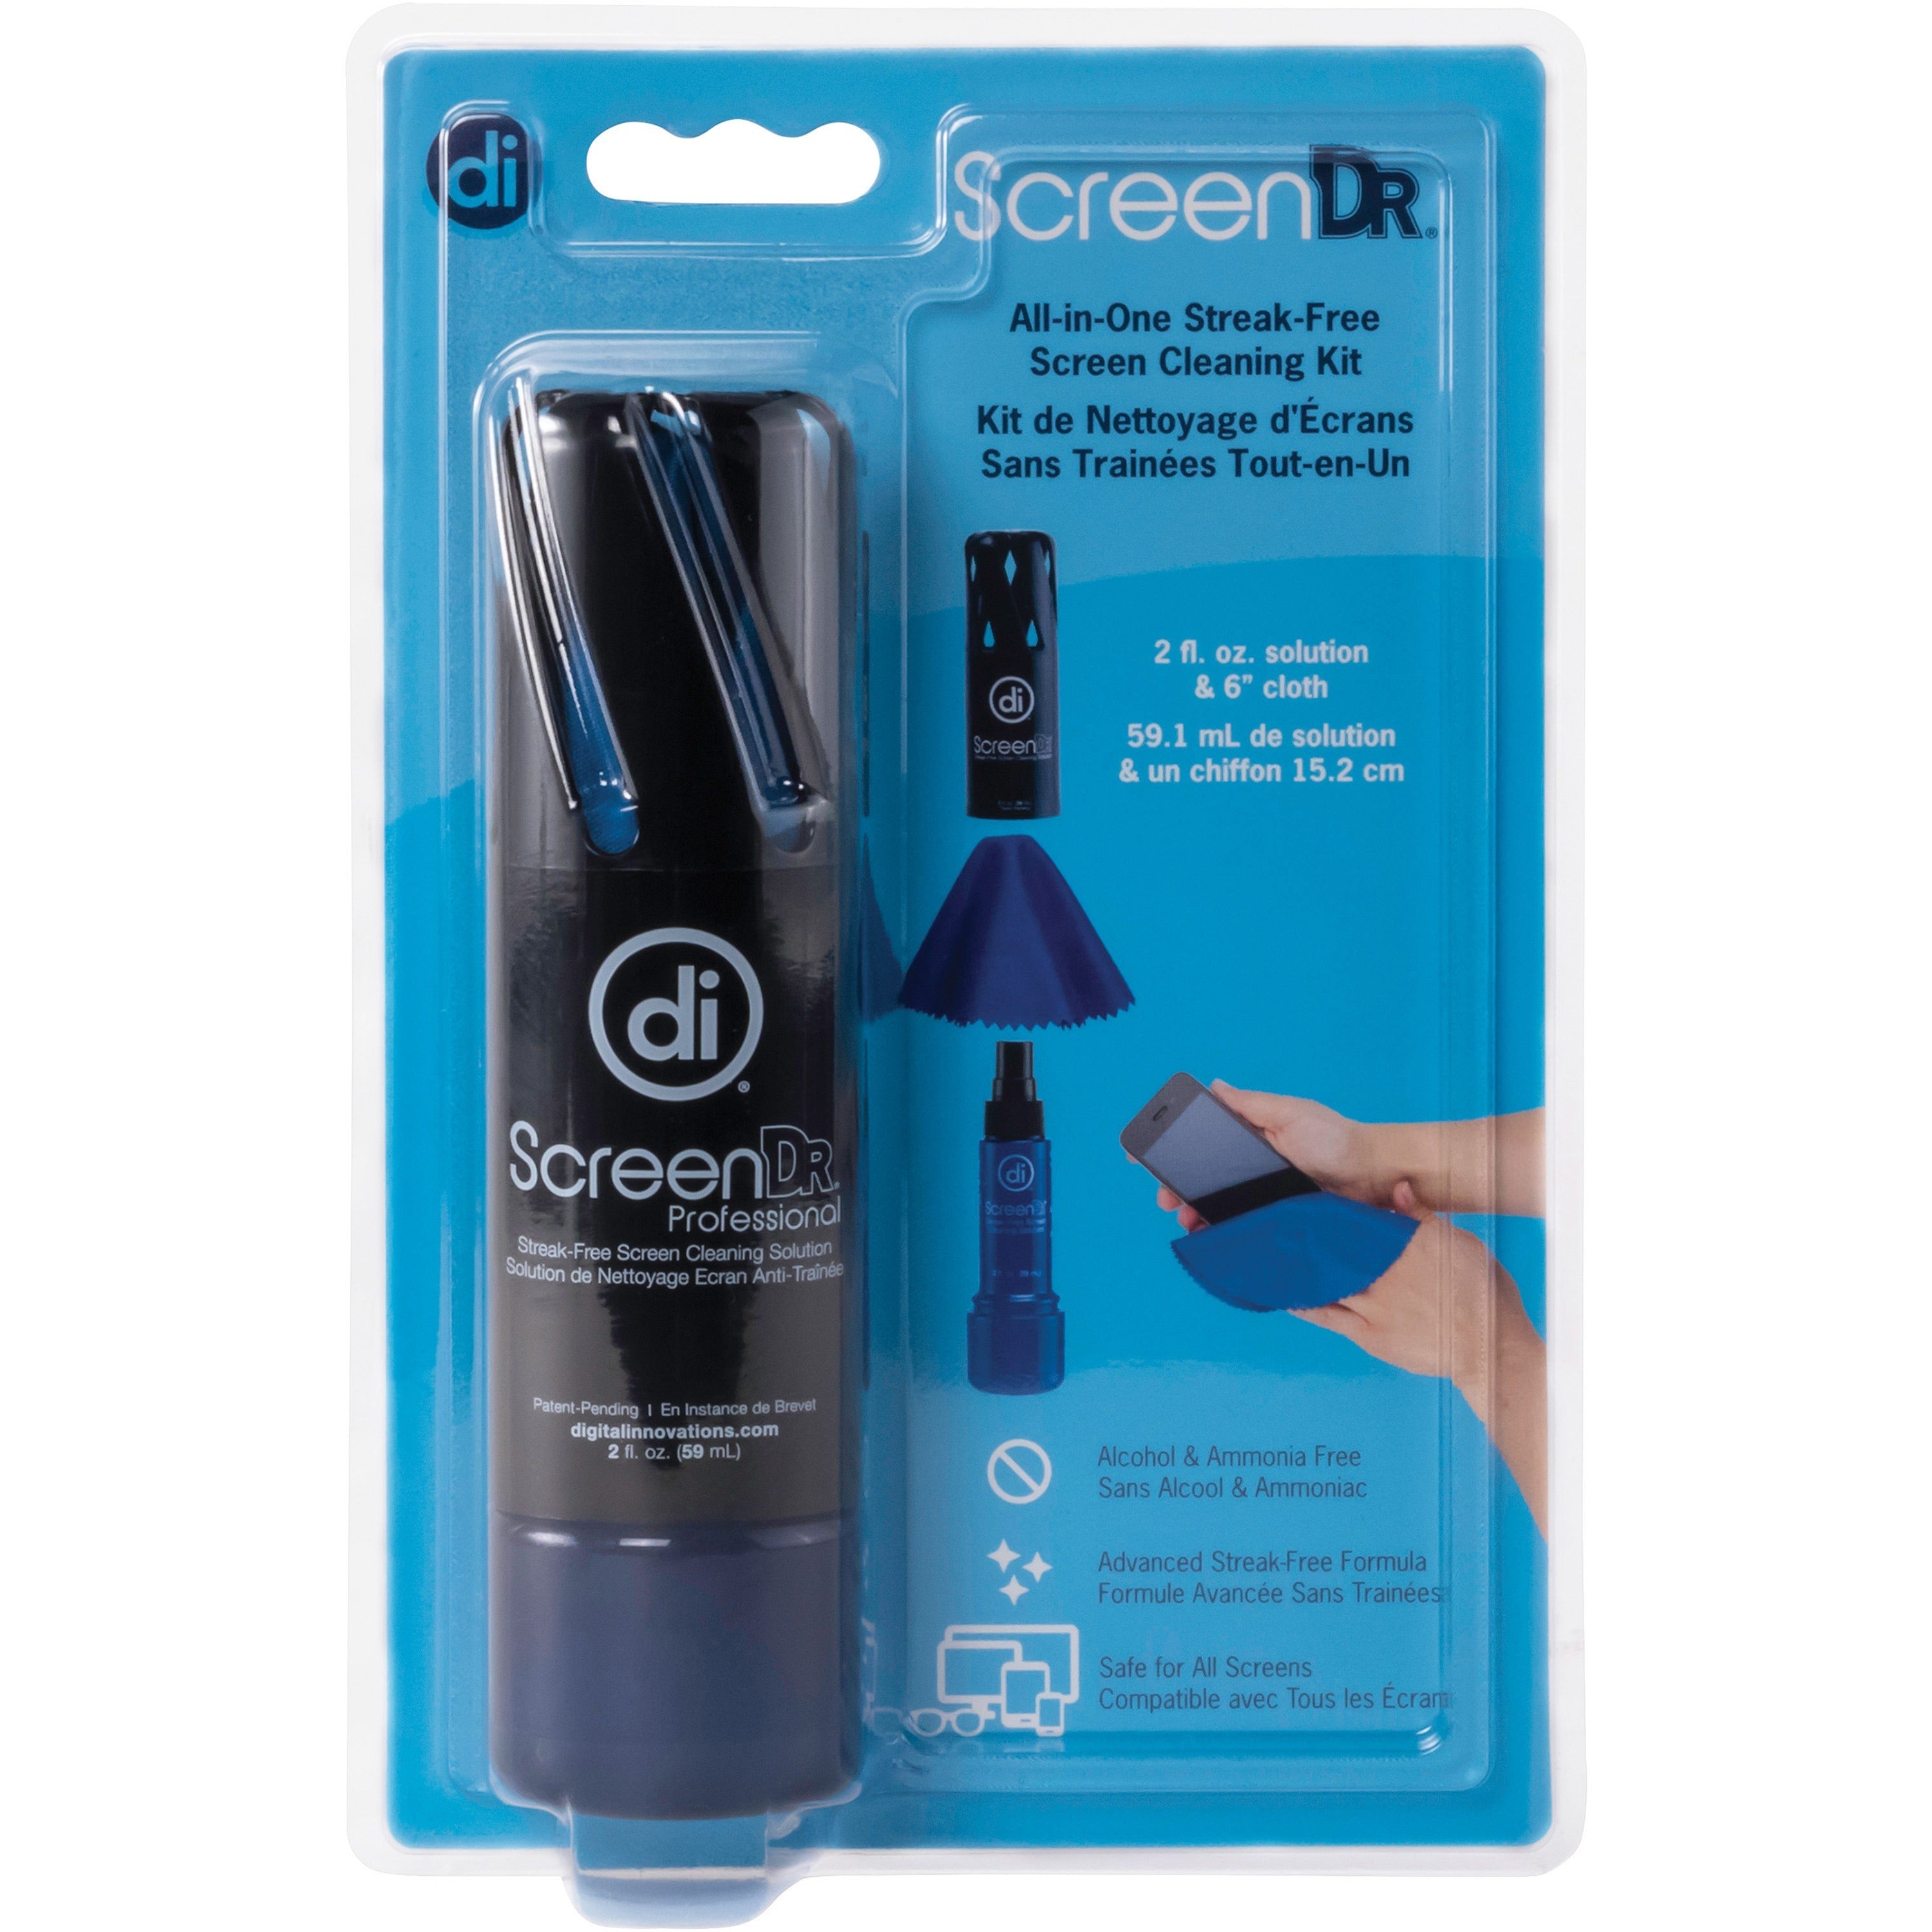 screendr-2oz-screen-cleaning-kit-for-mp3-player-smartphone-tablet-display-screen-electronic-equipment-2-fl-oz-abrasion-free-streak-free-microfiber-1-each_asp4111100 - 1